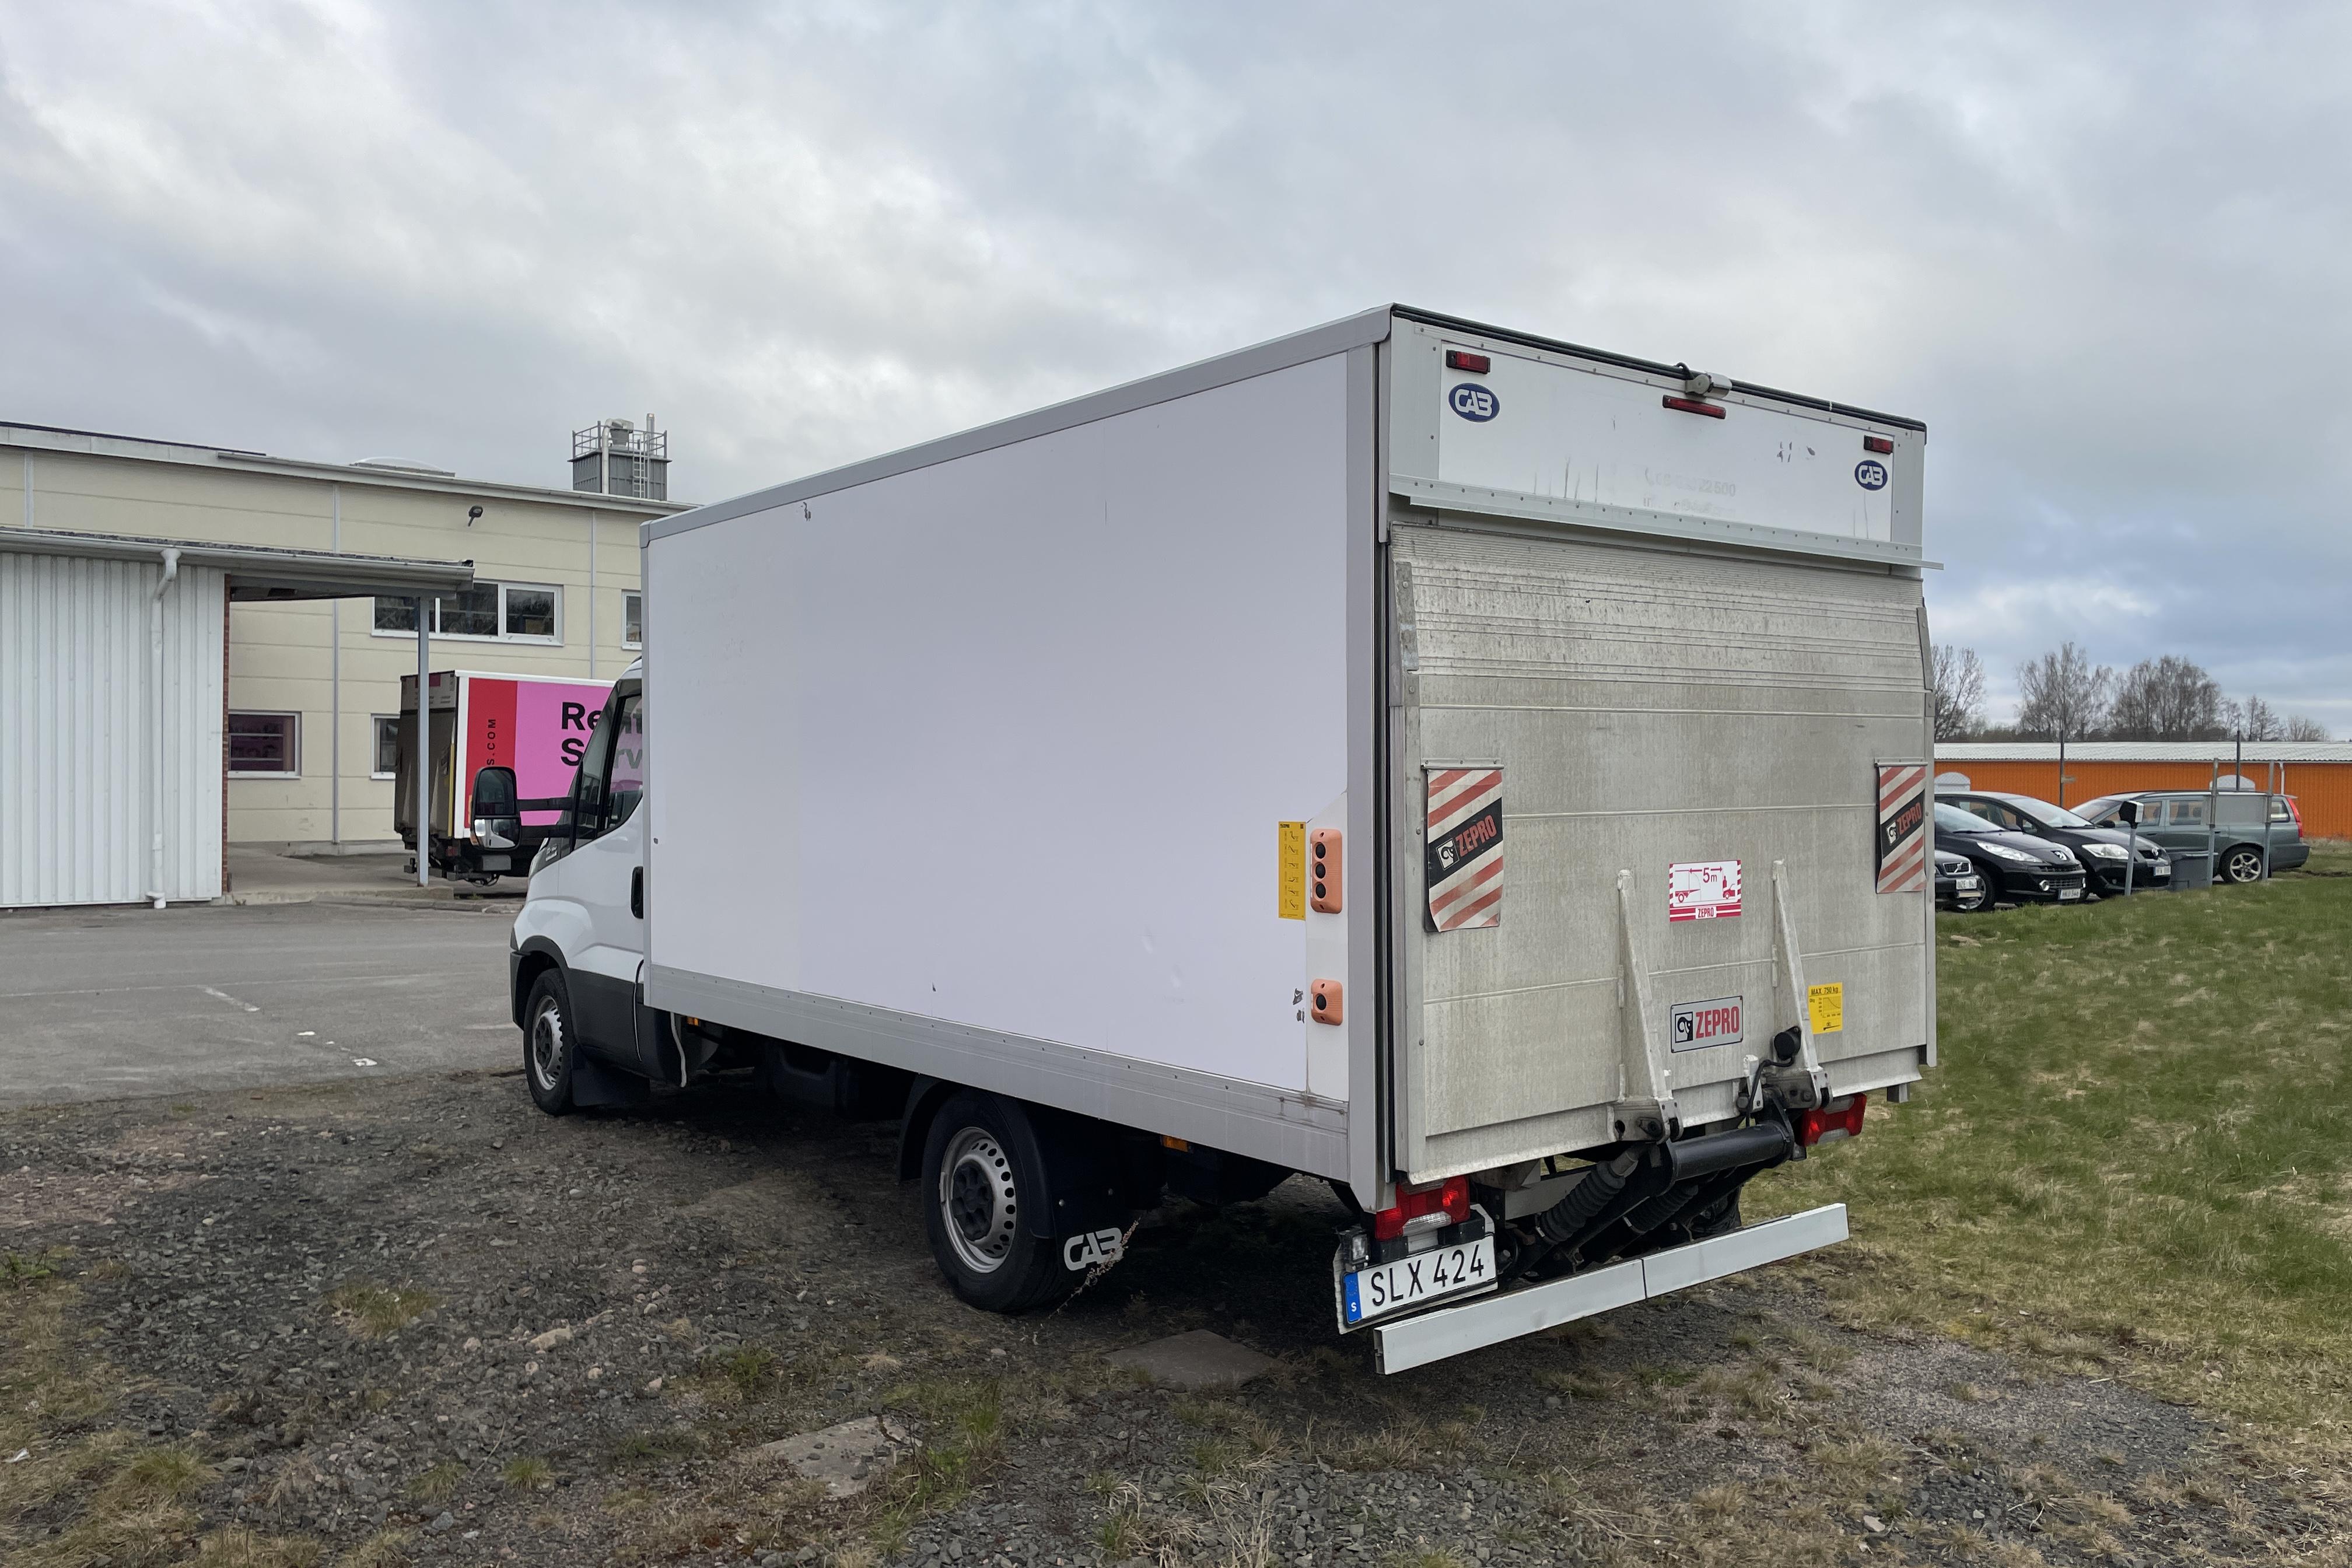 Iveco DAILY - 257 385 km - Automatic - white - 2017